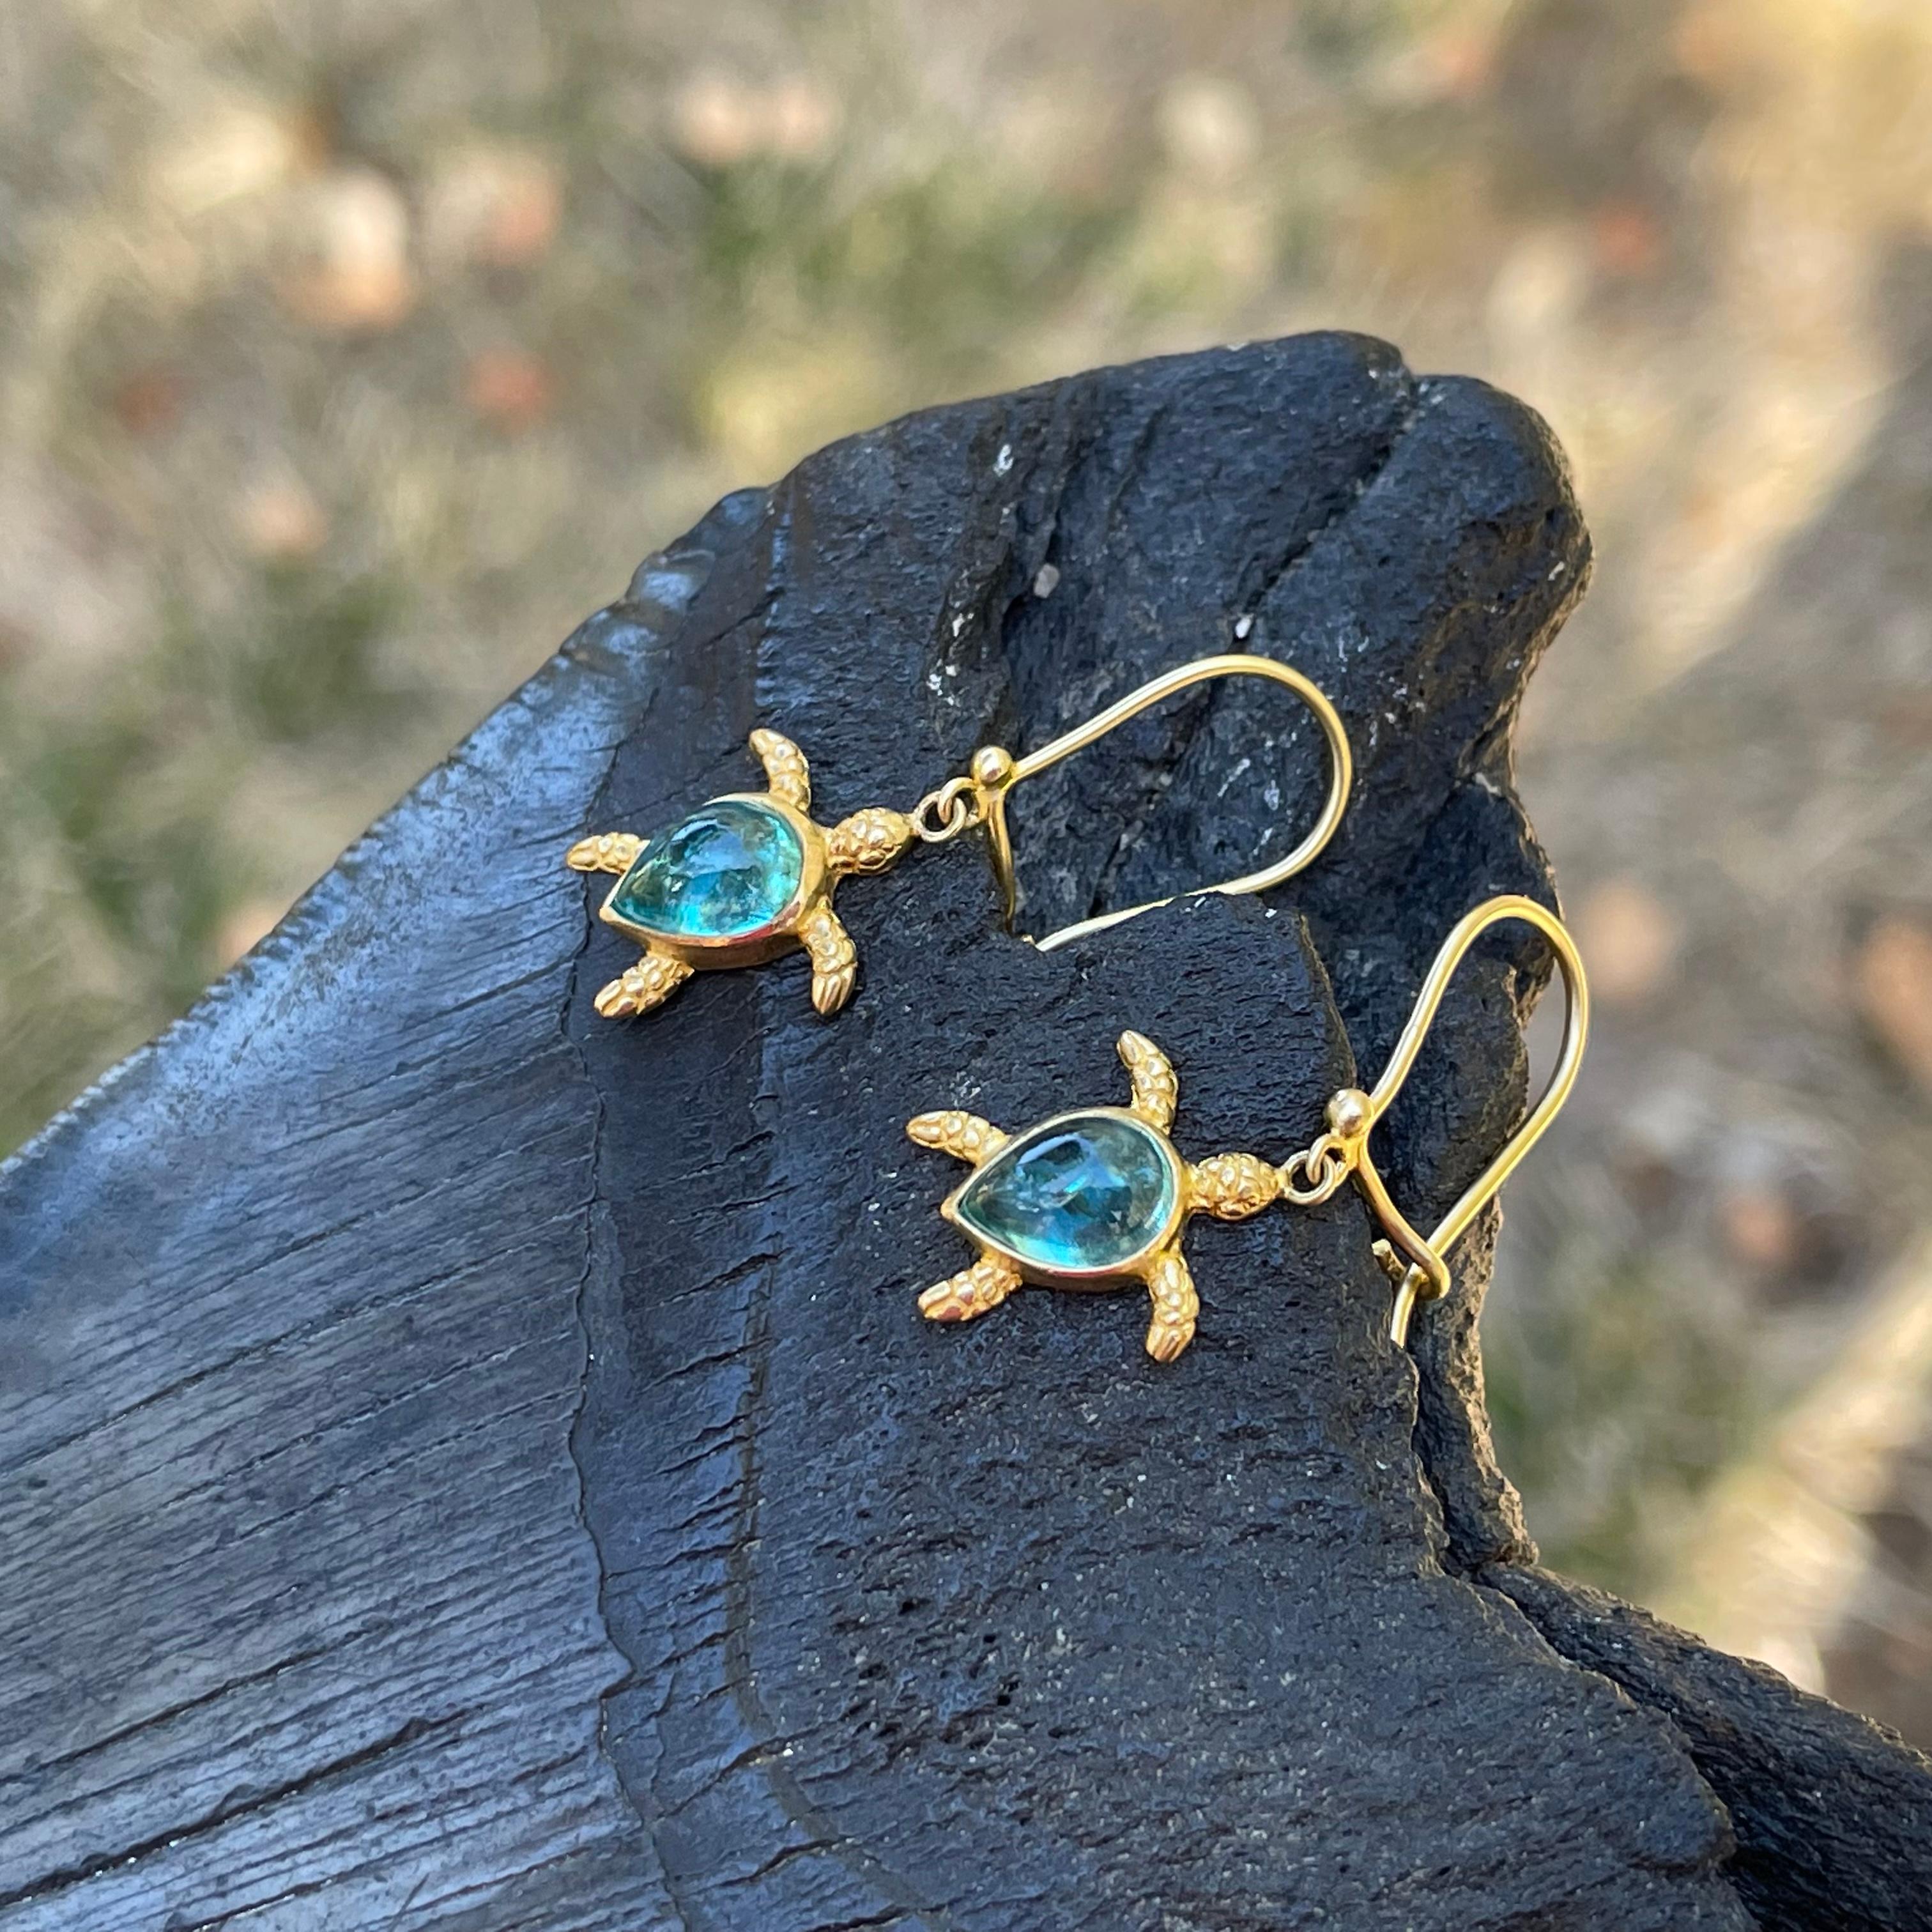 Steven Battelle 2.8 Carats Apatite Sea Turtle 18K Gold Drop Earrings In New Condition For Sale In Soquel, CA